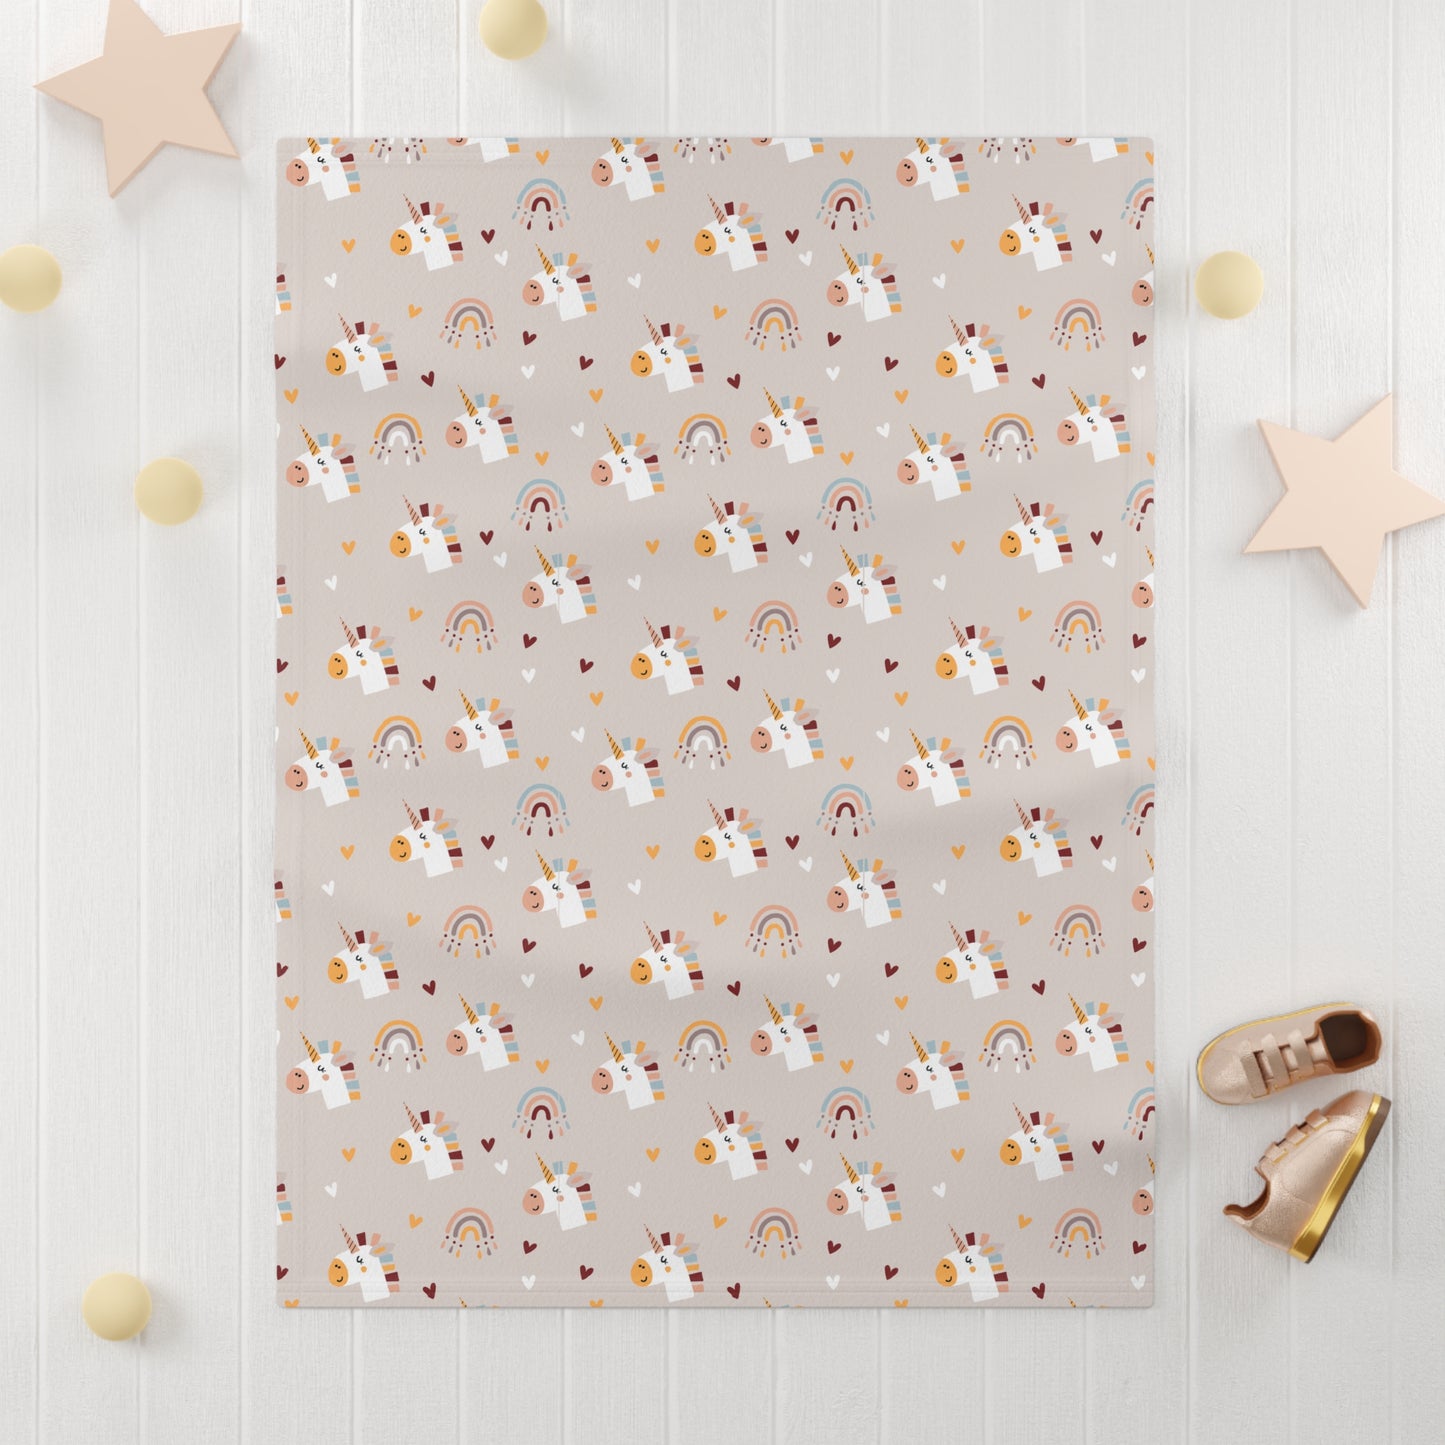 Cute and Cuddly Hush White Unicorns Hearts and Rainbows Soft Fleece Baby Blanket